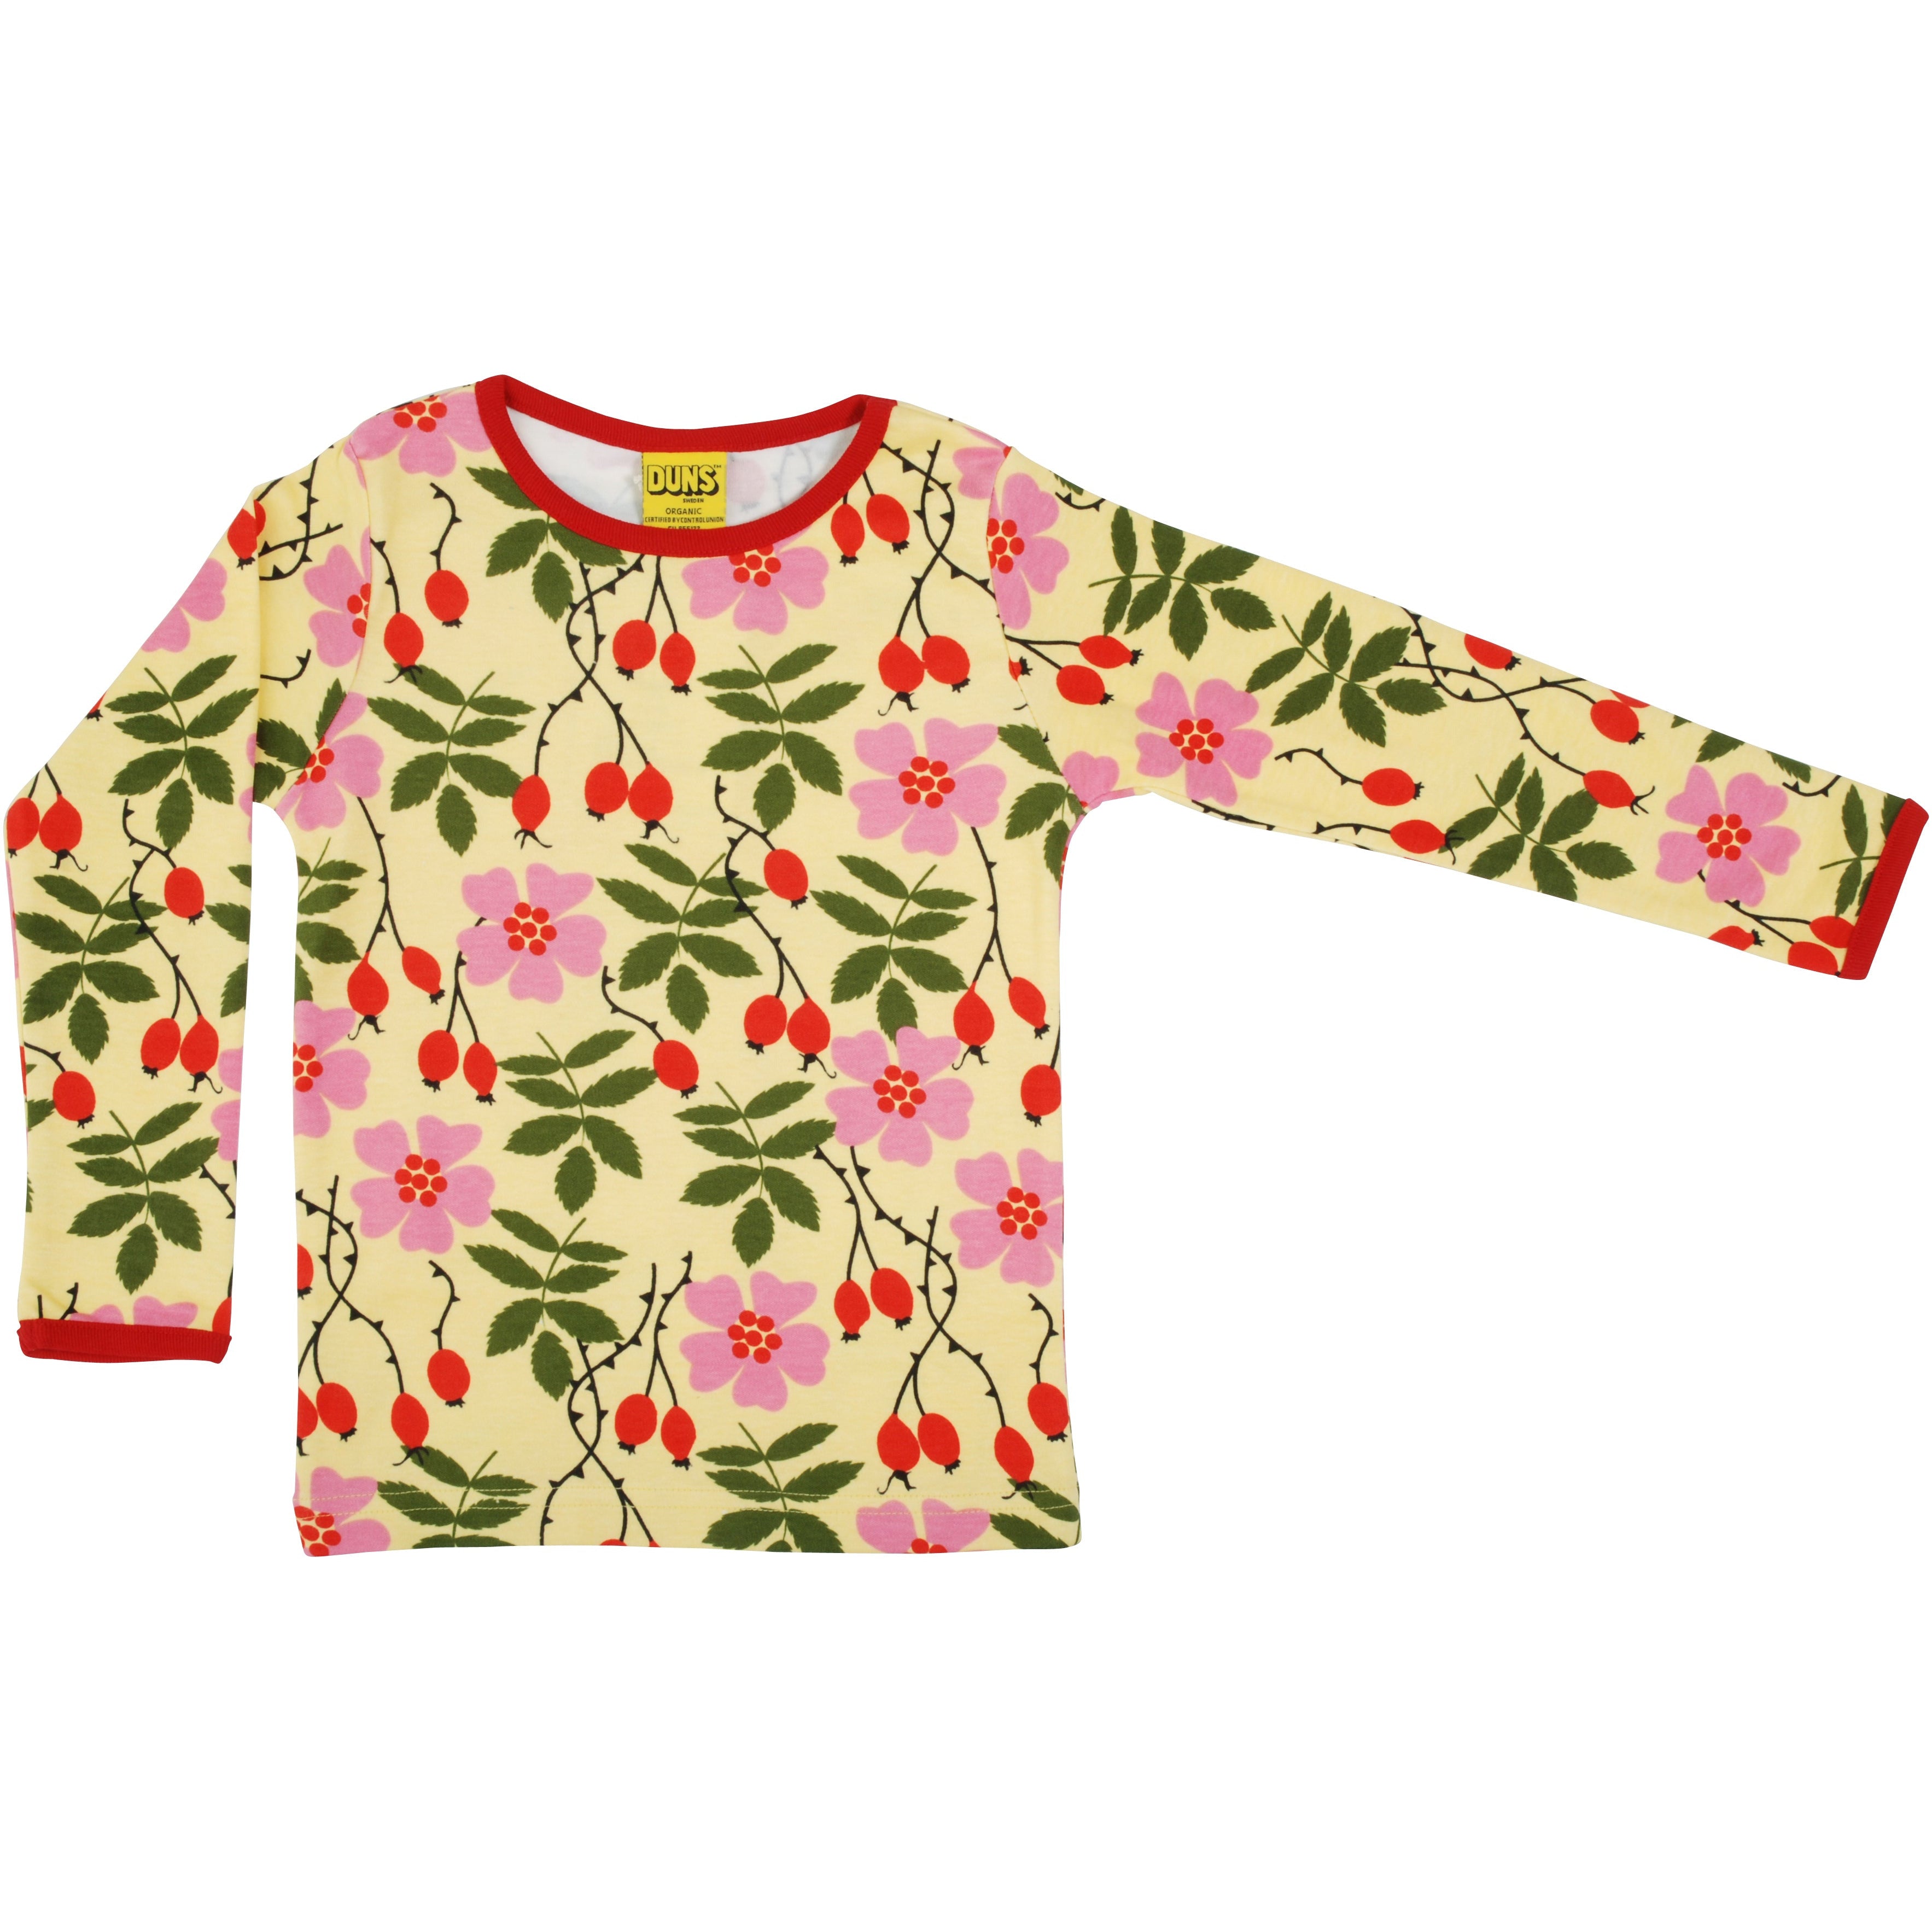 Adult's Rosehip Yellow Organic Long Sleeved T-Shirt - Duns Sweden (Last Available)